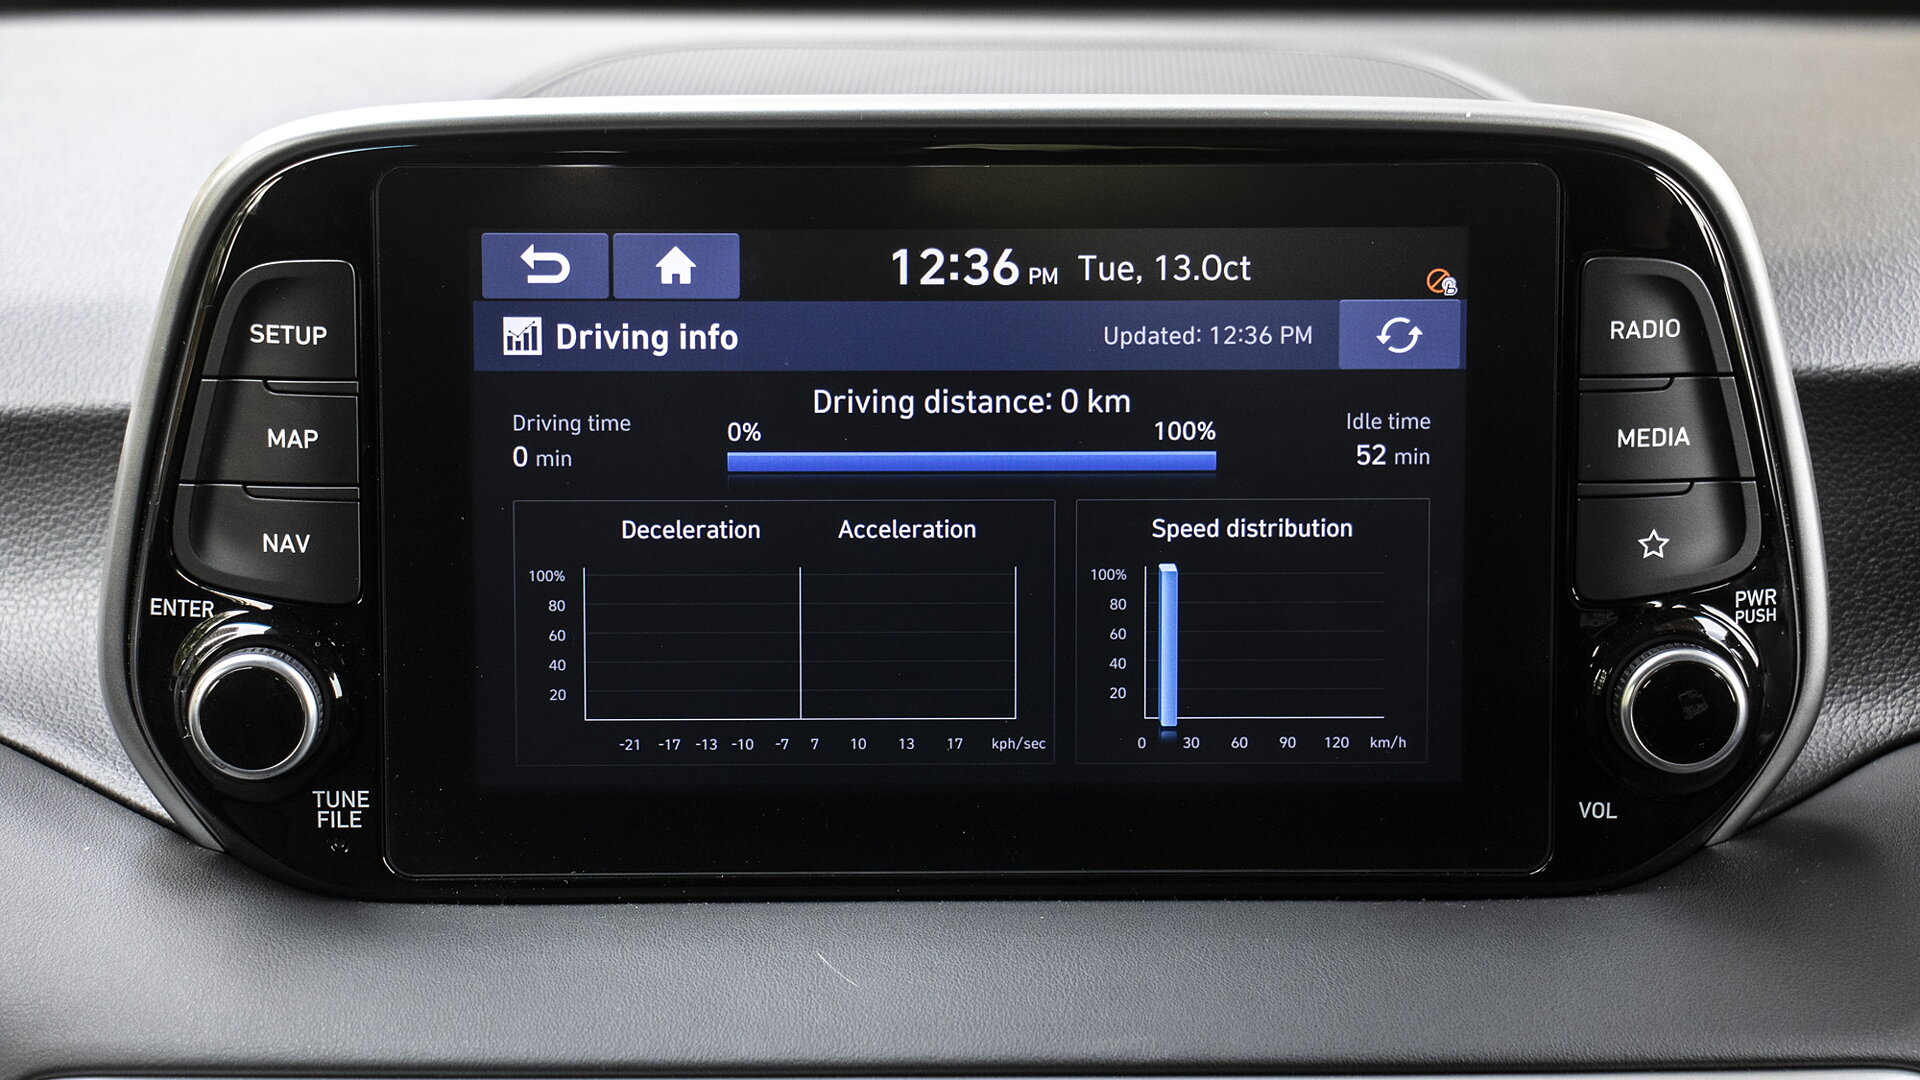 Tucson Infotainment System Image, Tucson Photos in India - CarWale